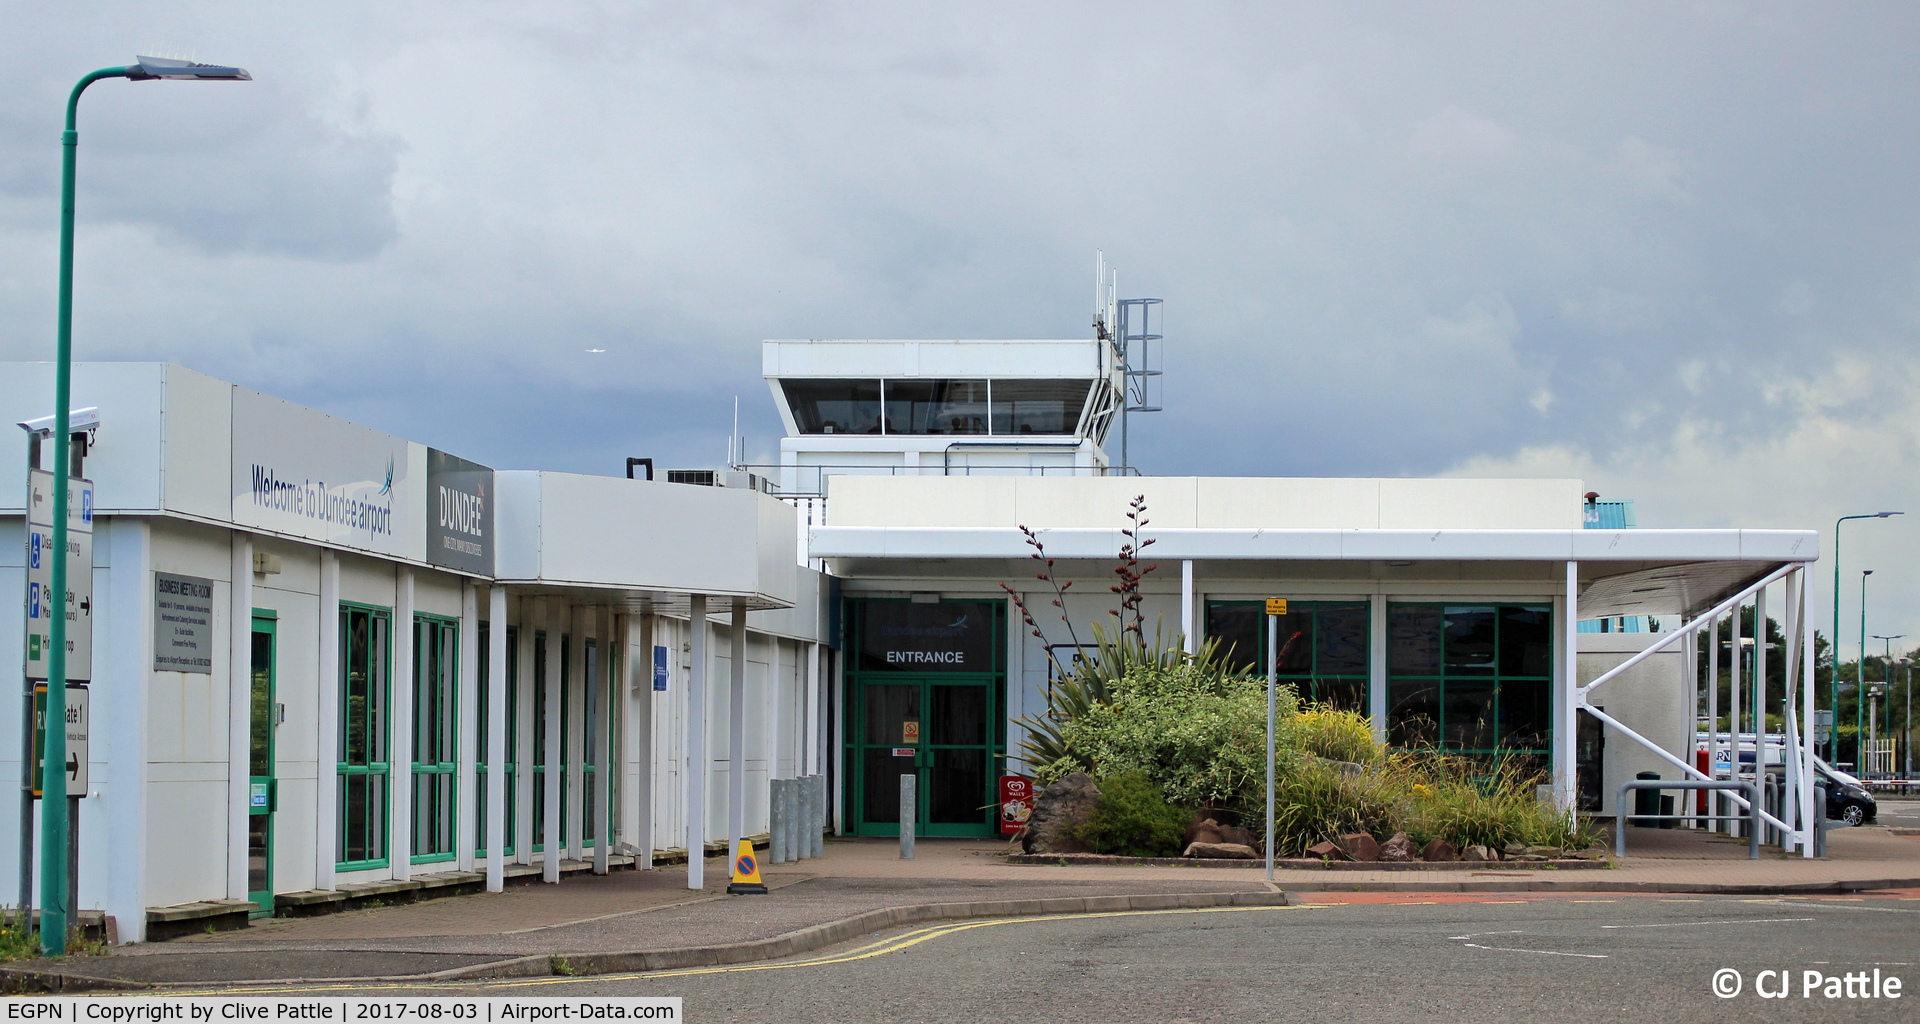 Dundee Airport, Dundee, Scotland United Kingdom (EGPN) - Airport terminal building entrance at Dundee